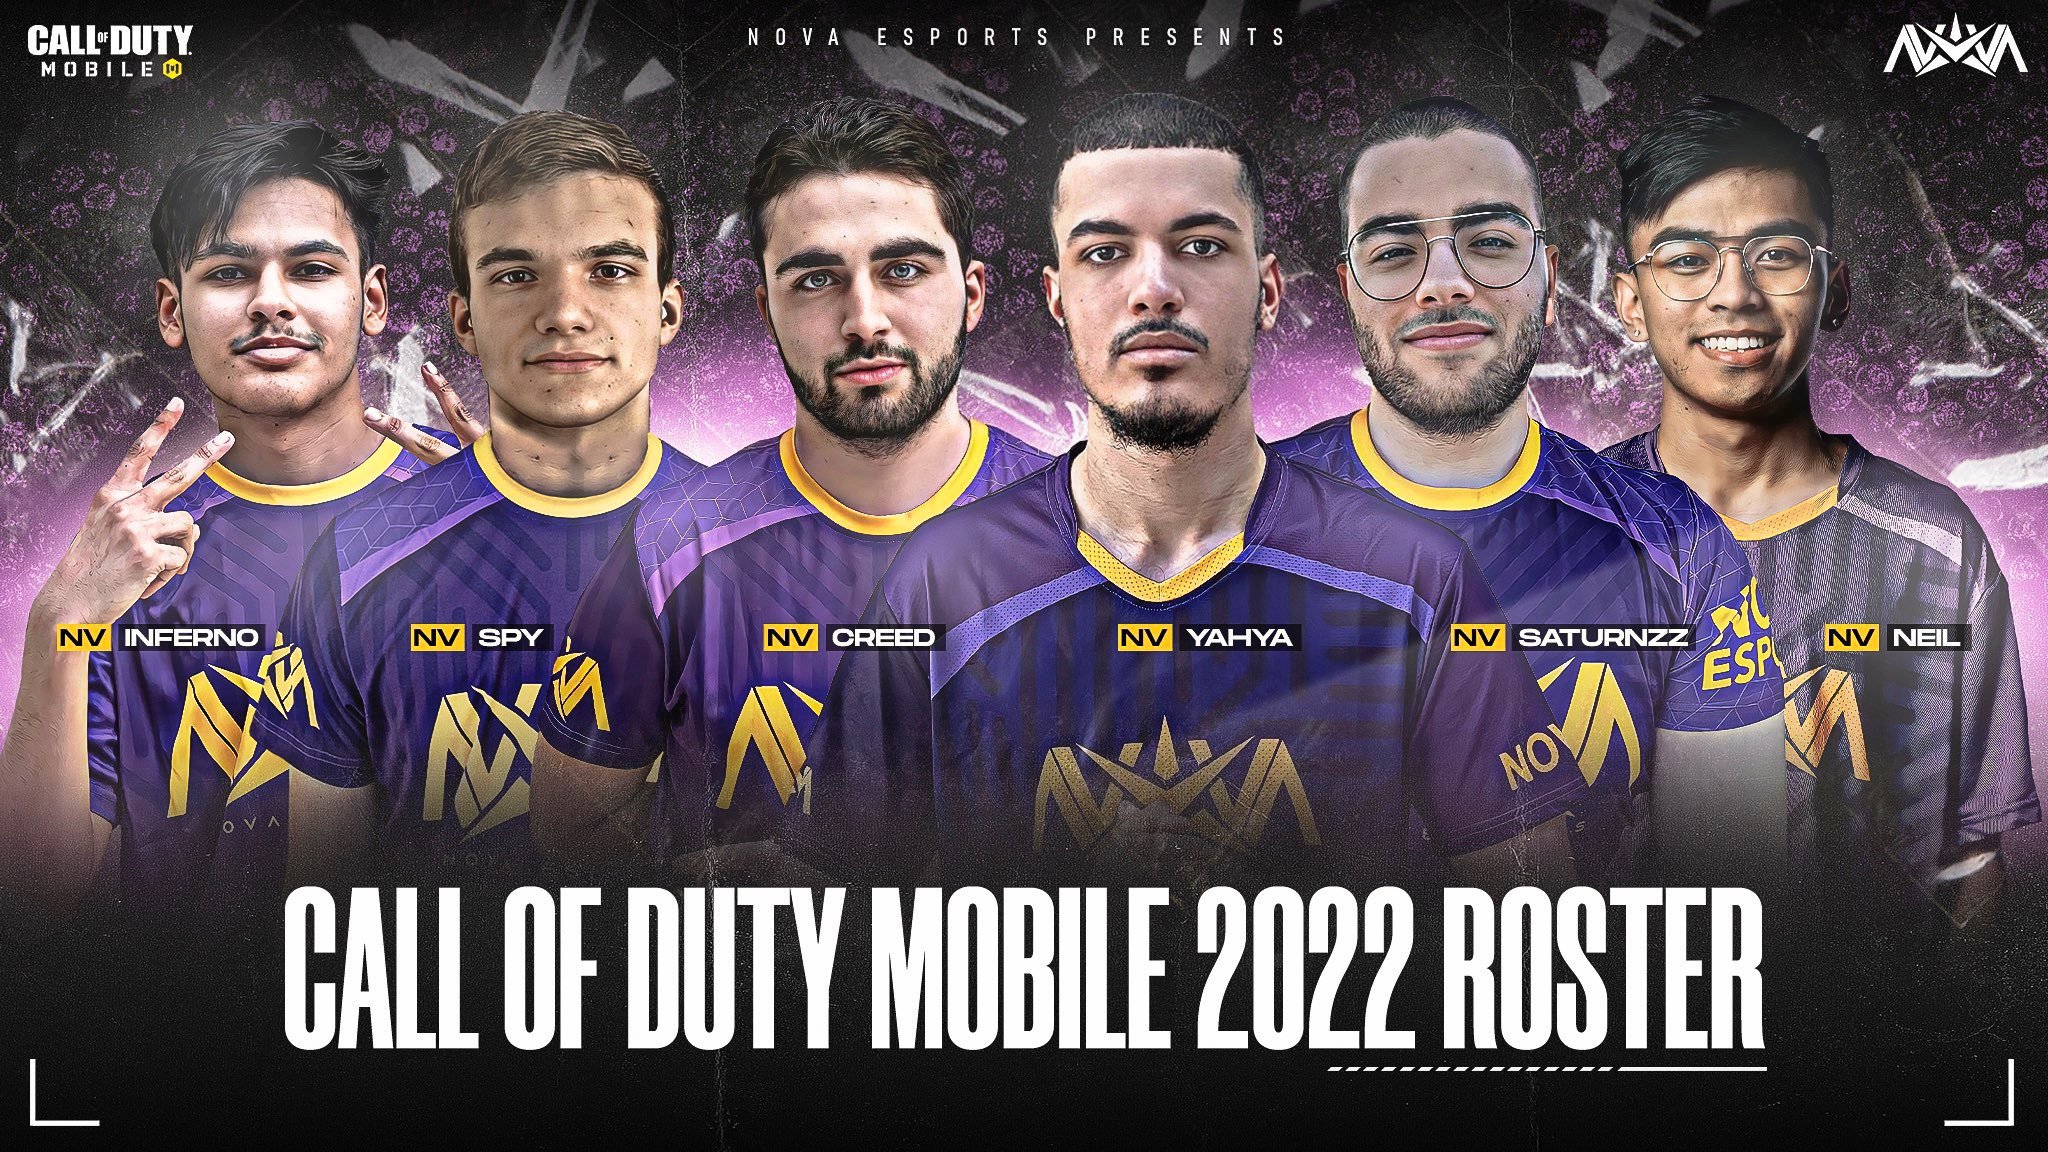 Announcing the Call of Duty®: Mobile World Championship 2020 Tournament  Starting on April 30